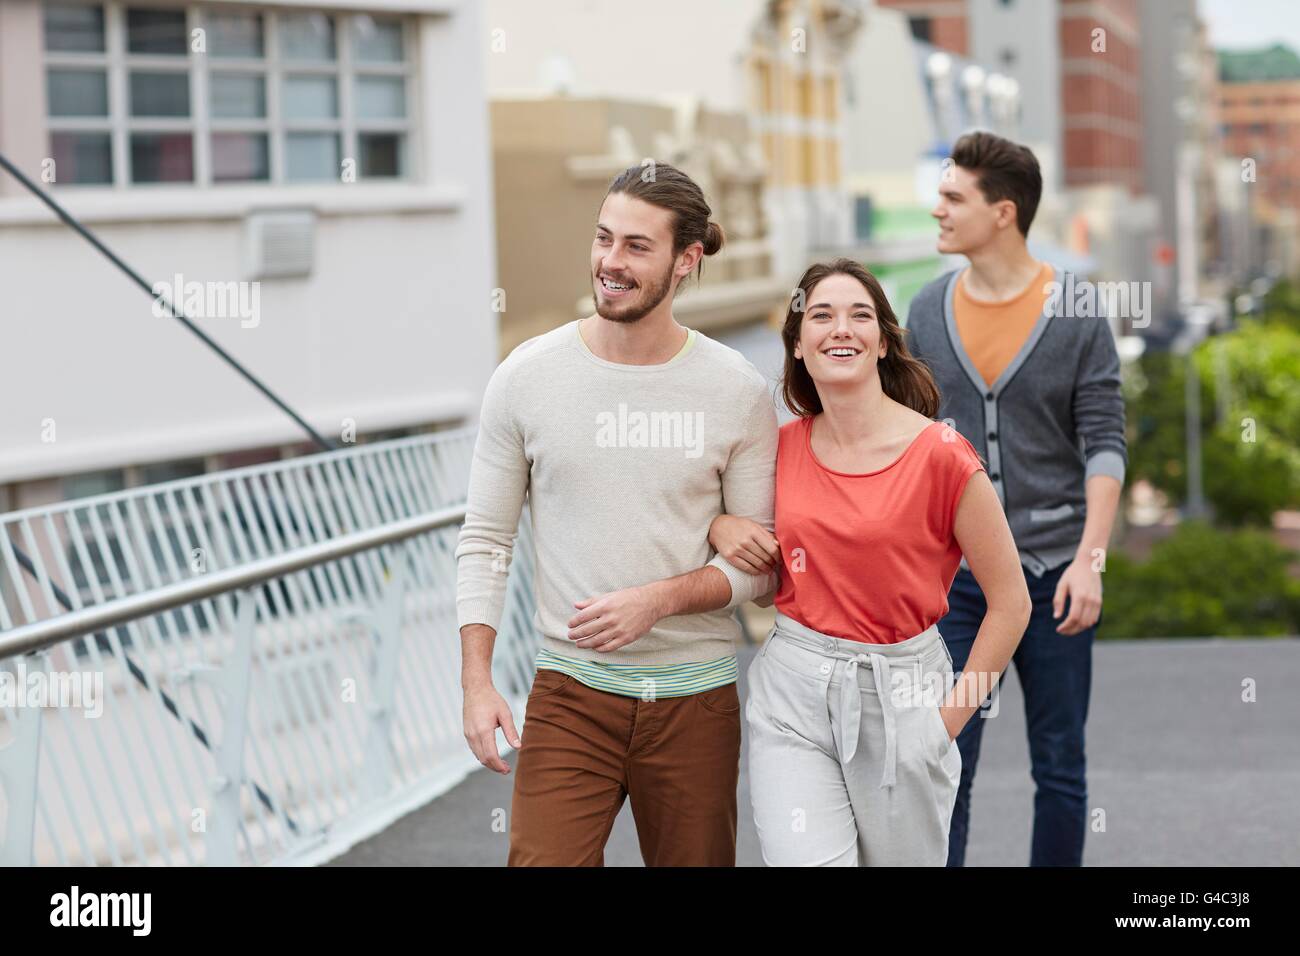 MODEL RELEASED. Three young friends walking. Stock Photo